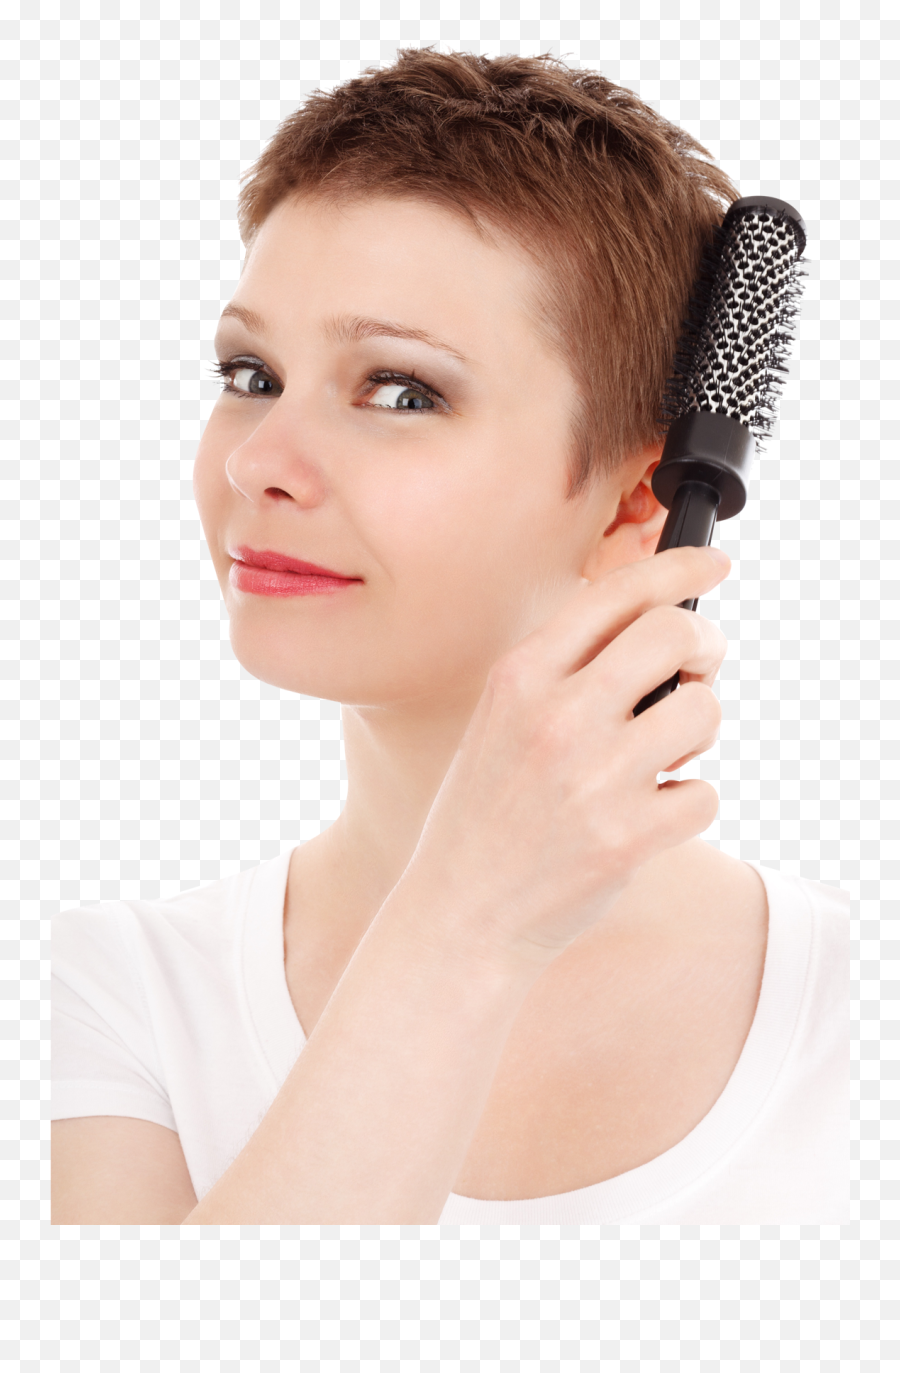 Woman Combing Her Hair Png Image - Pngpix Girl Brushing Her Hair Png,Women Hair Png